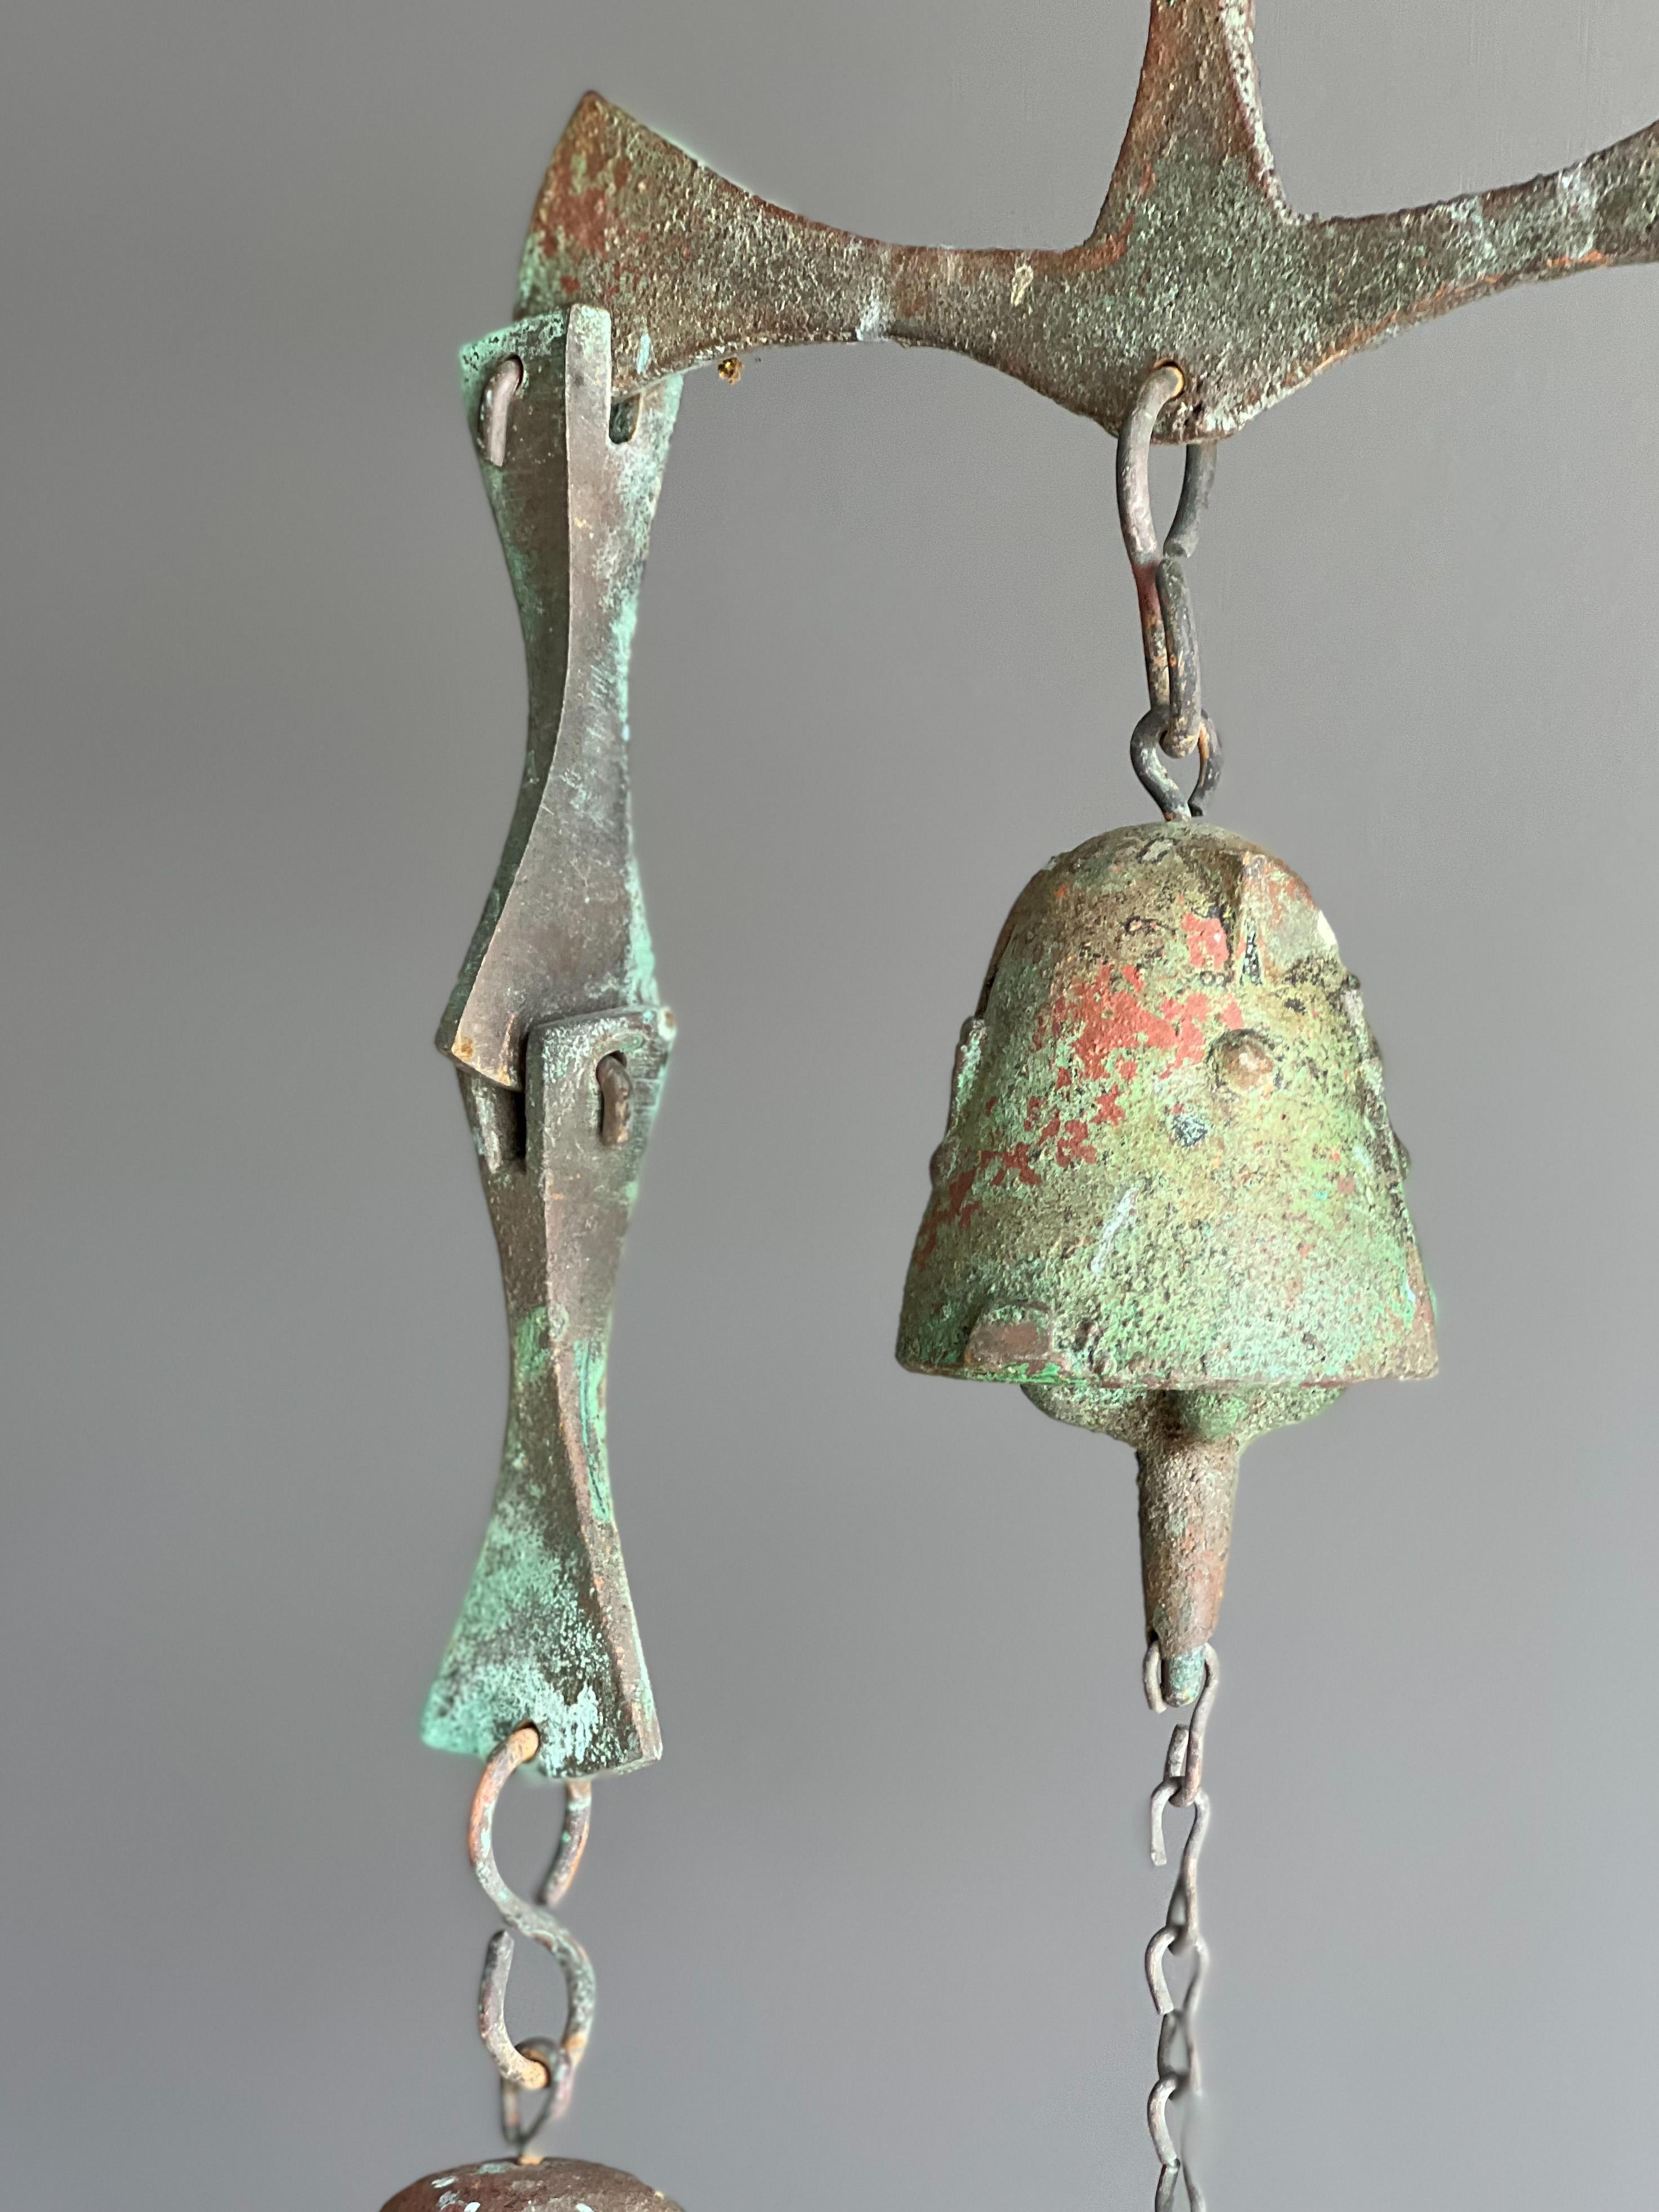 American Early Mid-Century Bronze Wind Chime Bell by Poalo Soleri for Arcosanti 1970s